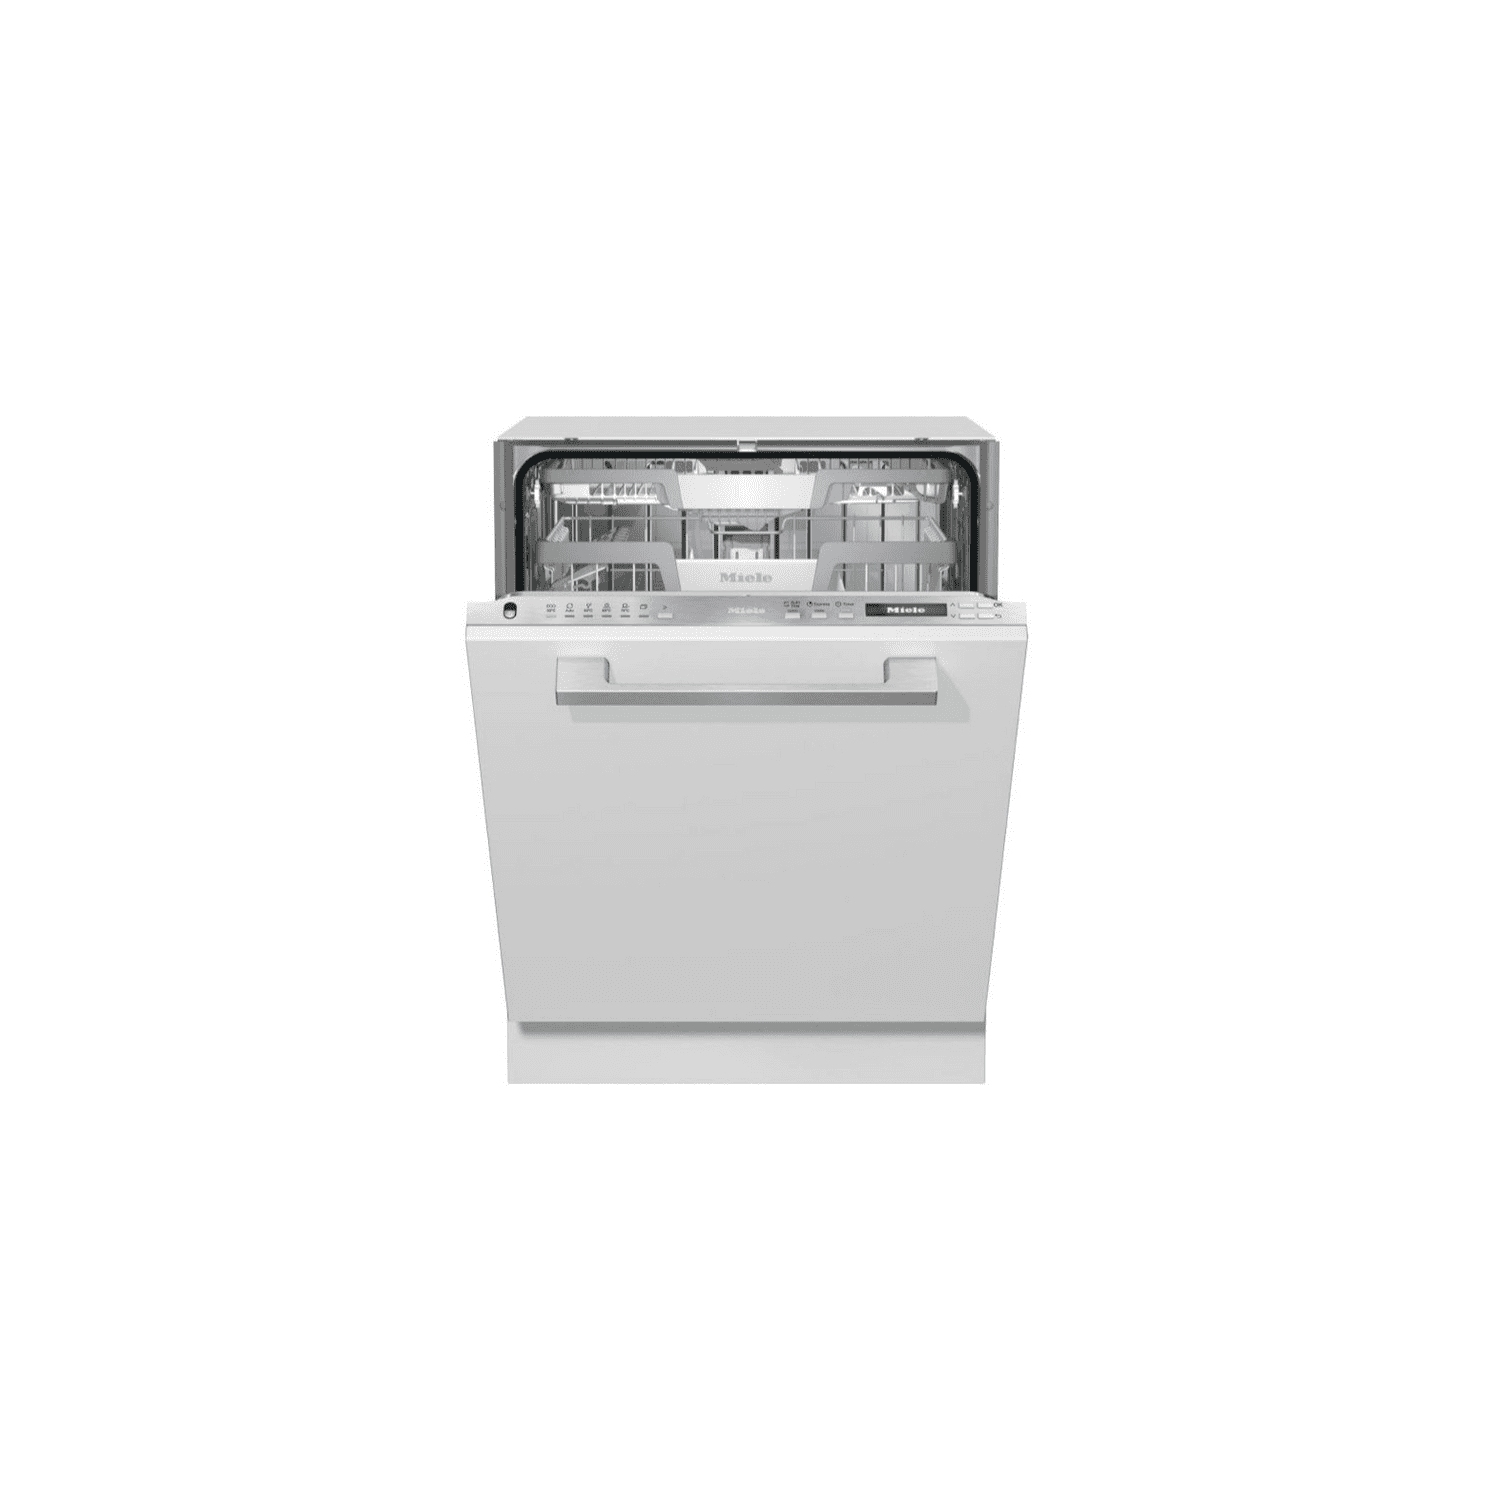 Miele G7160SCVI Fully Integrated Dishwasher - 0